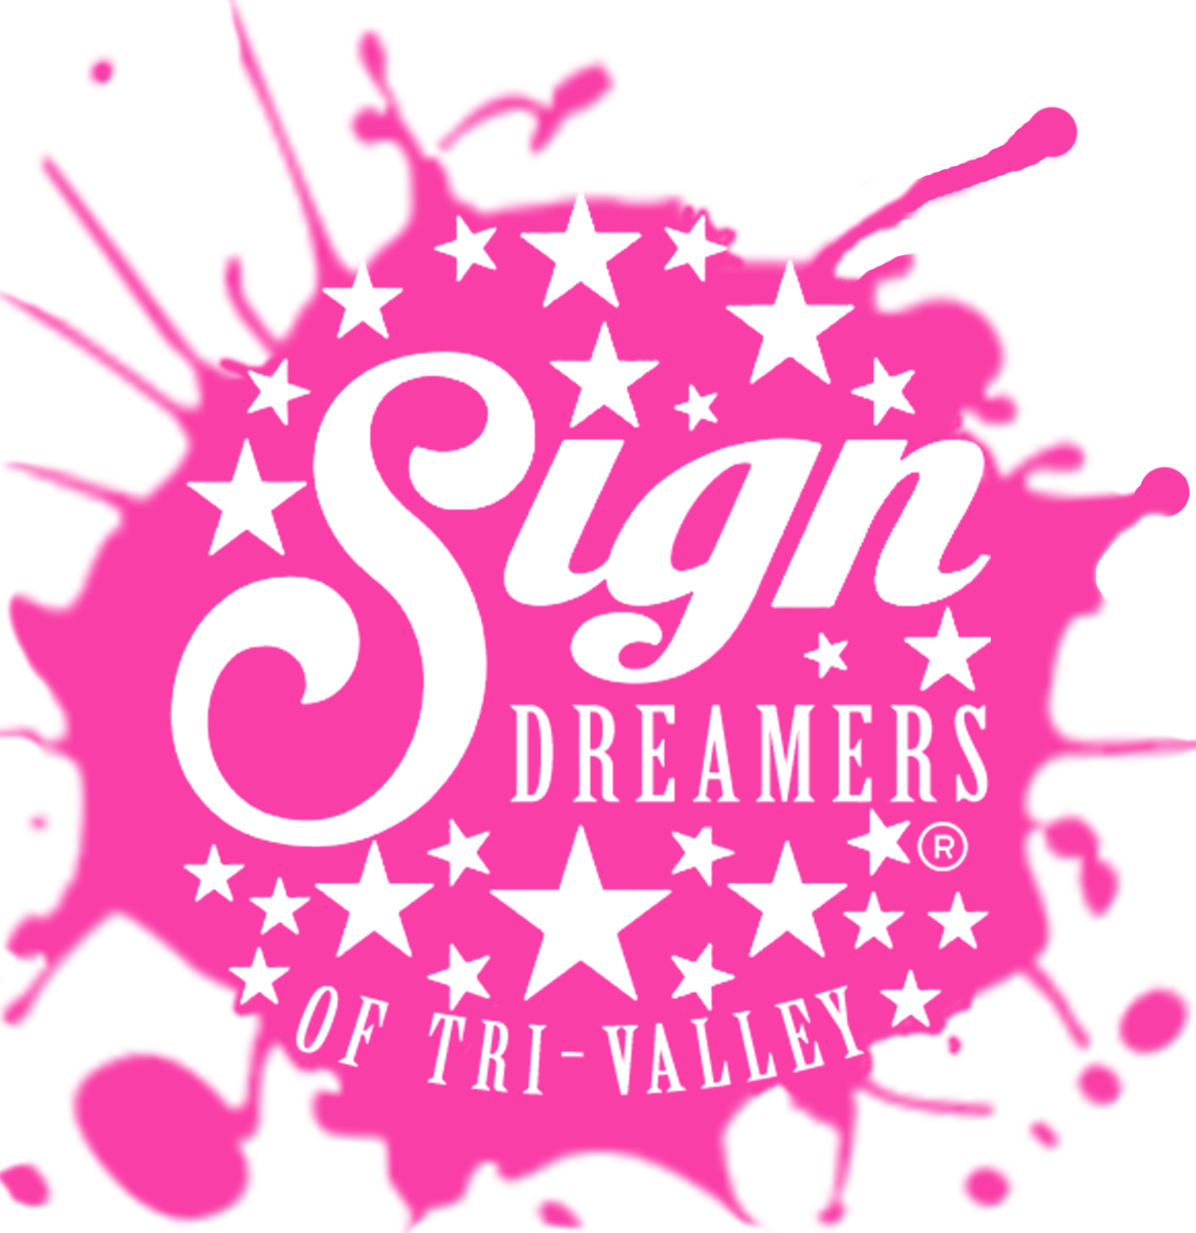 Sign Dreamers of Tri-Valley